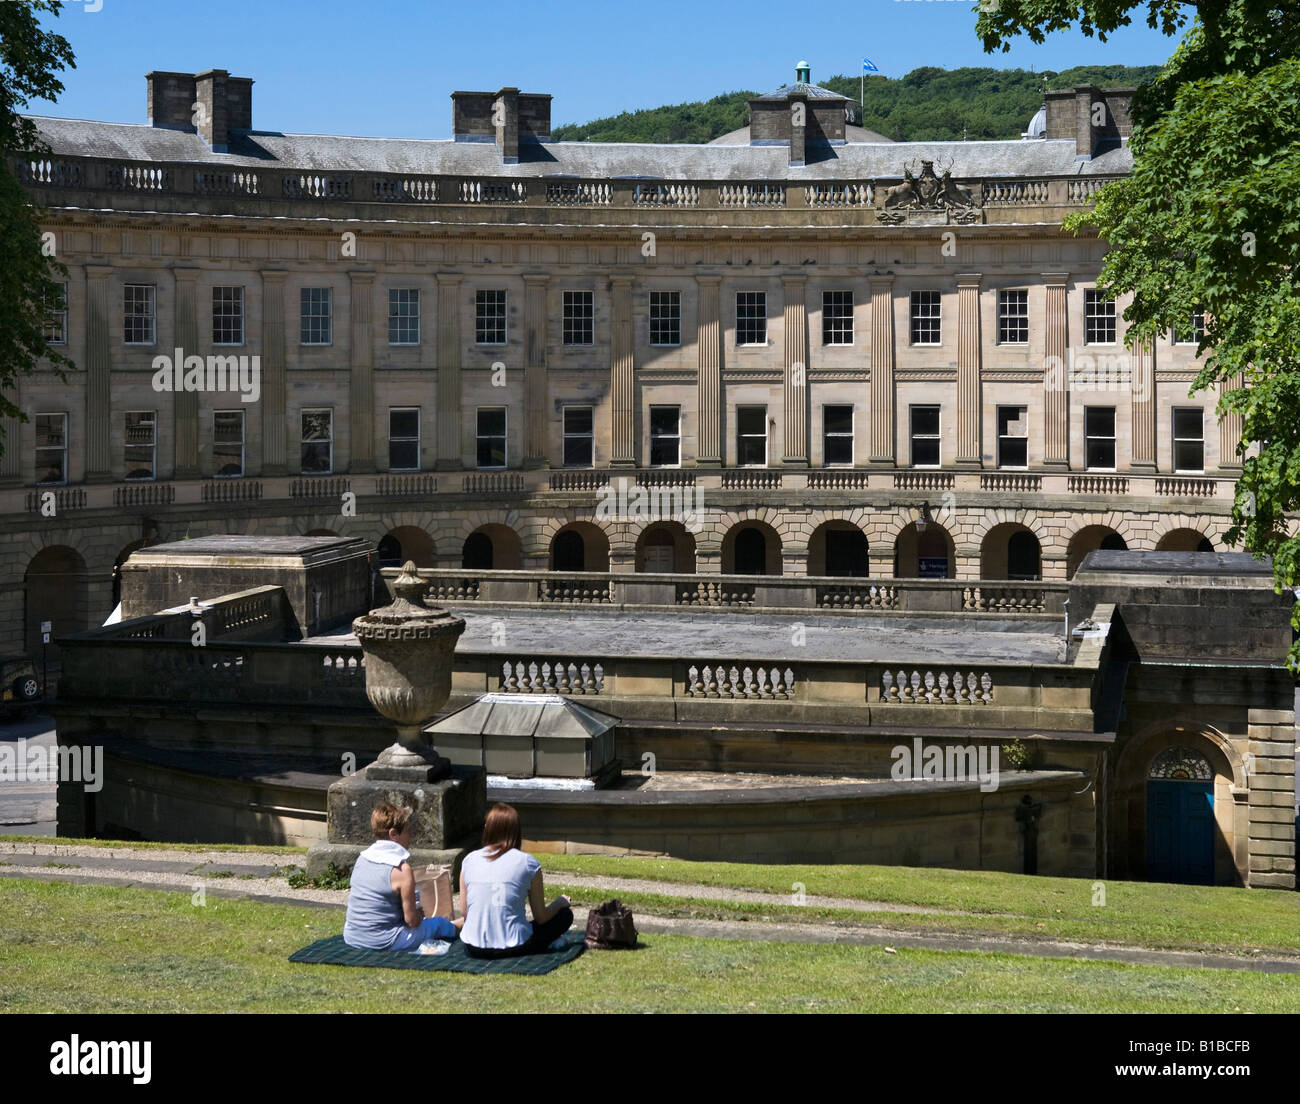 Two women eating picnic lunch overlooking The Crescent & Pump Room, The Slopes, Buxton, Peak District, Derbyshire, England Stock Photo